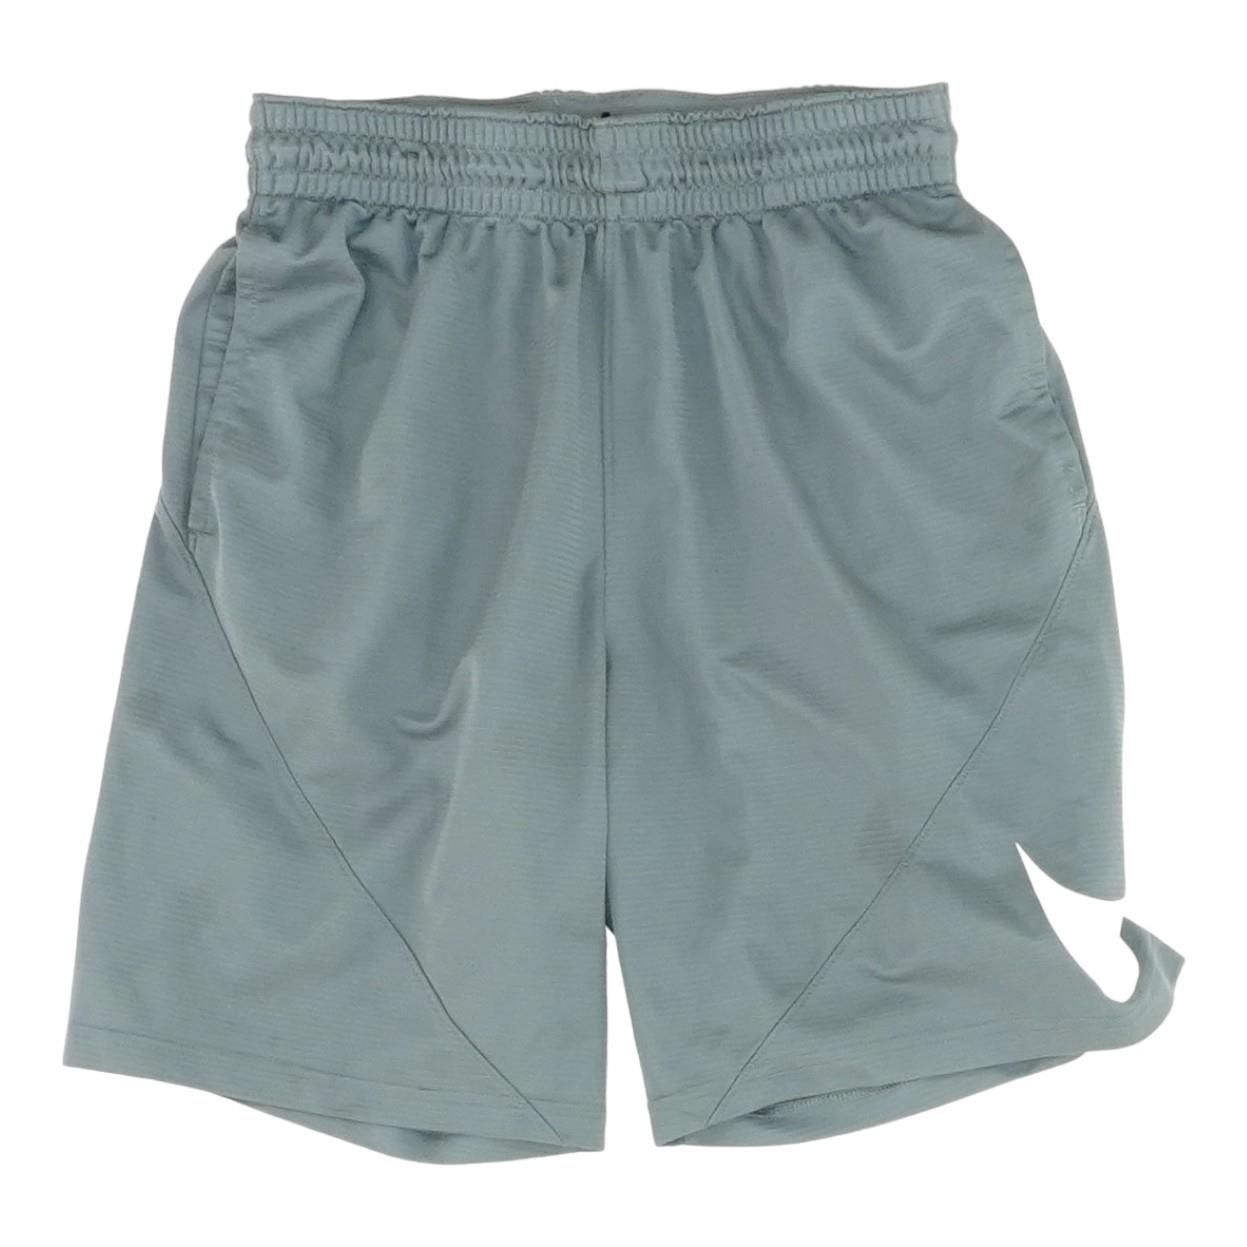 Perfect Shorts - 9 - Solid